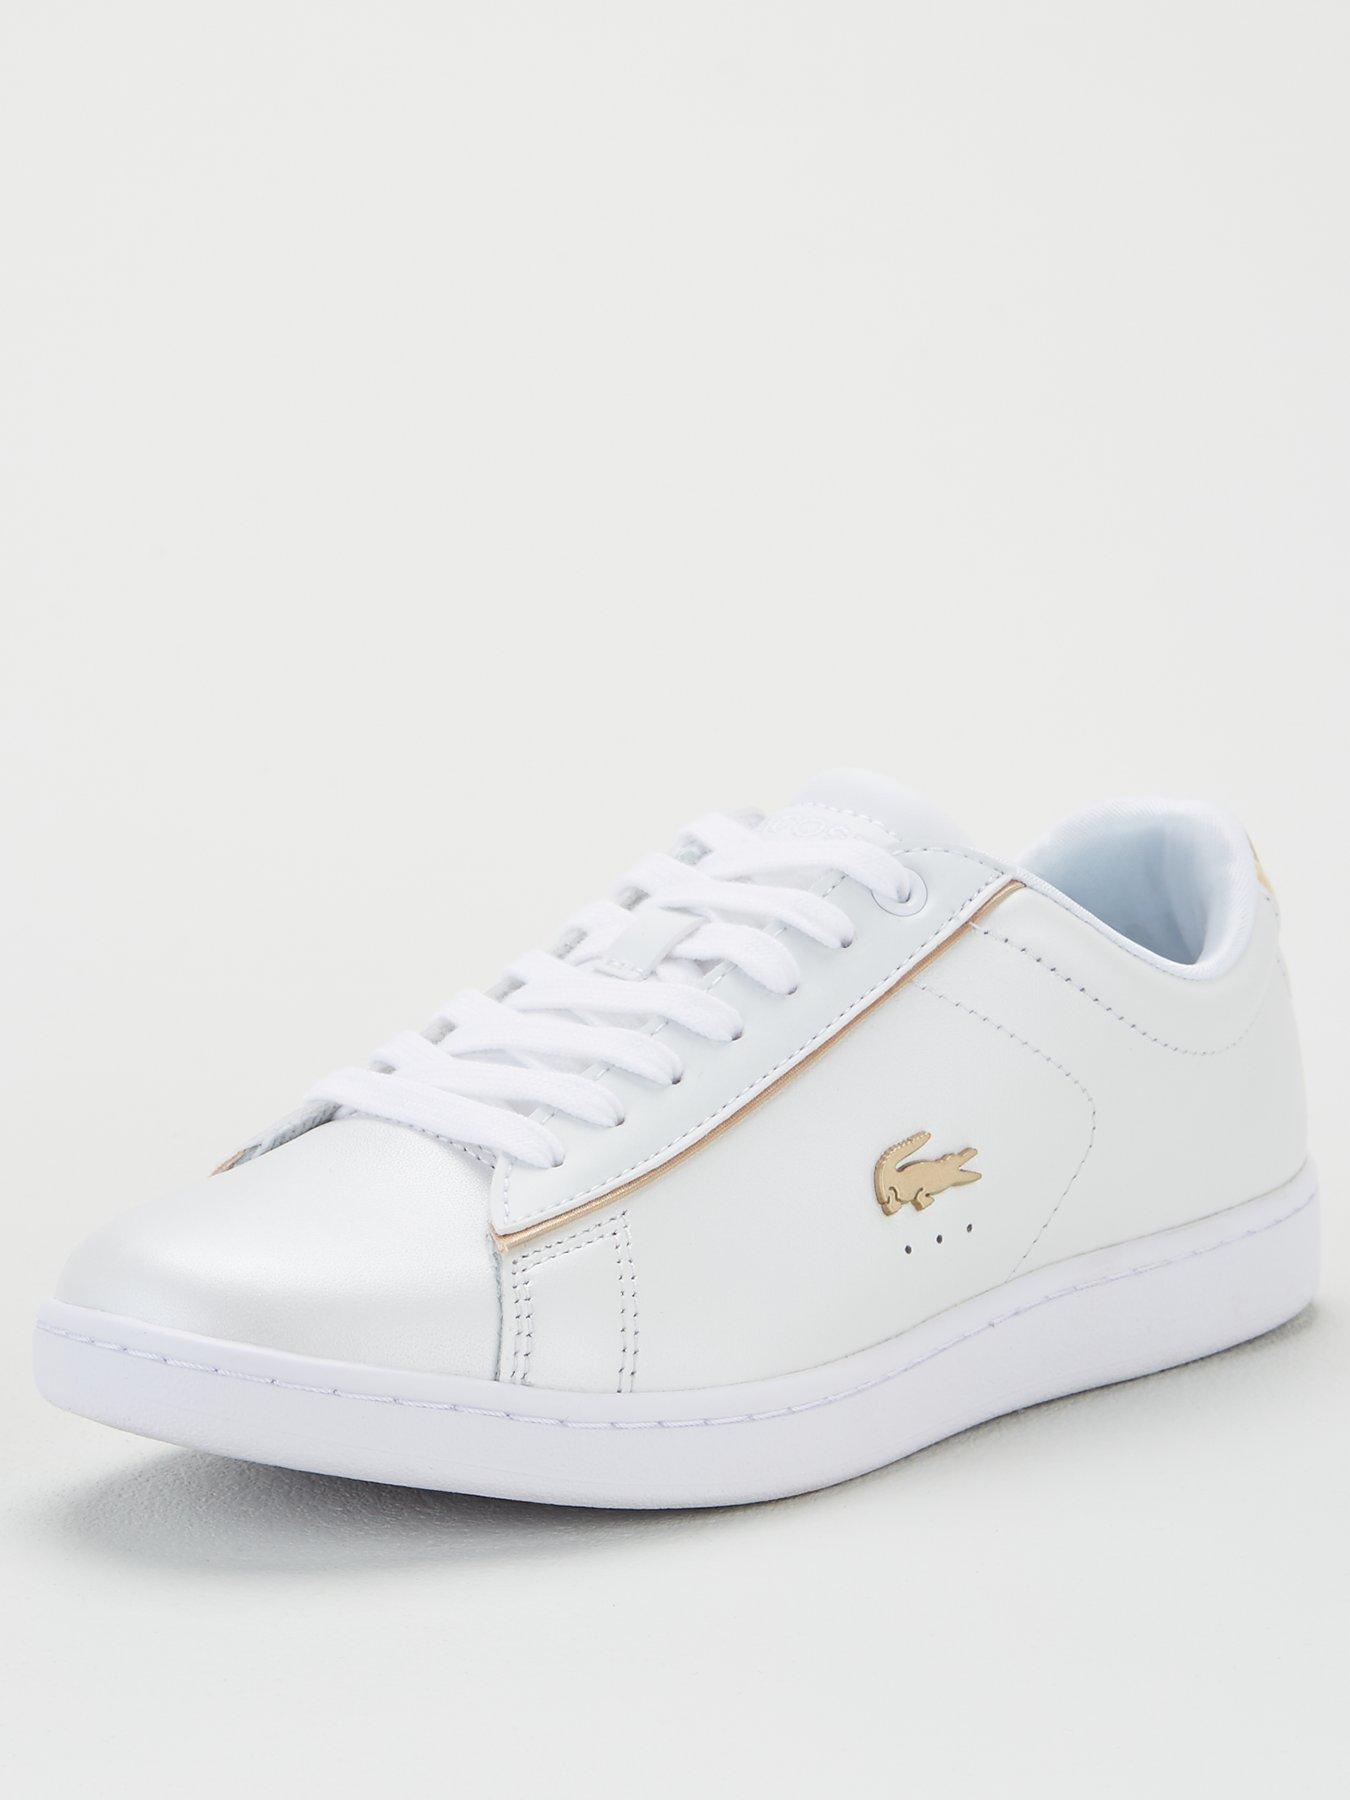 lacoste shoes gold logo off 72 